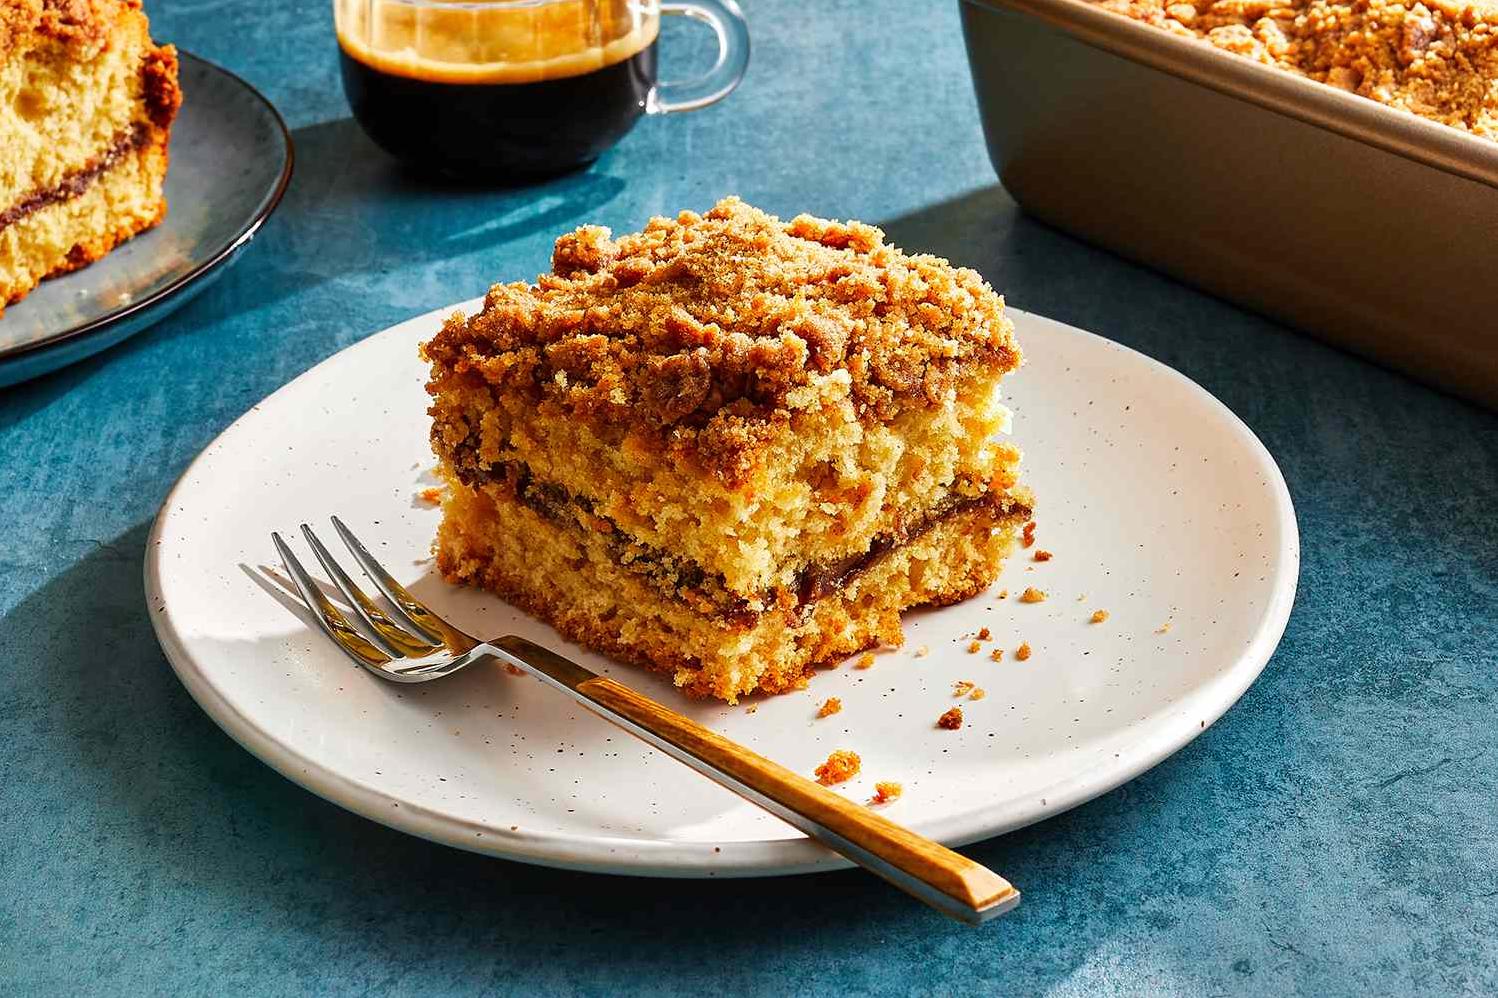  One slice of this coffee cake is enough to awaken your taste buds.